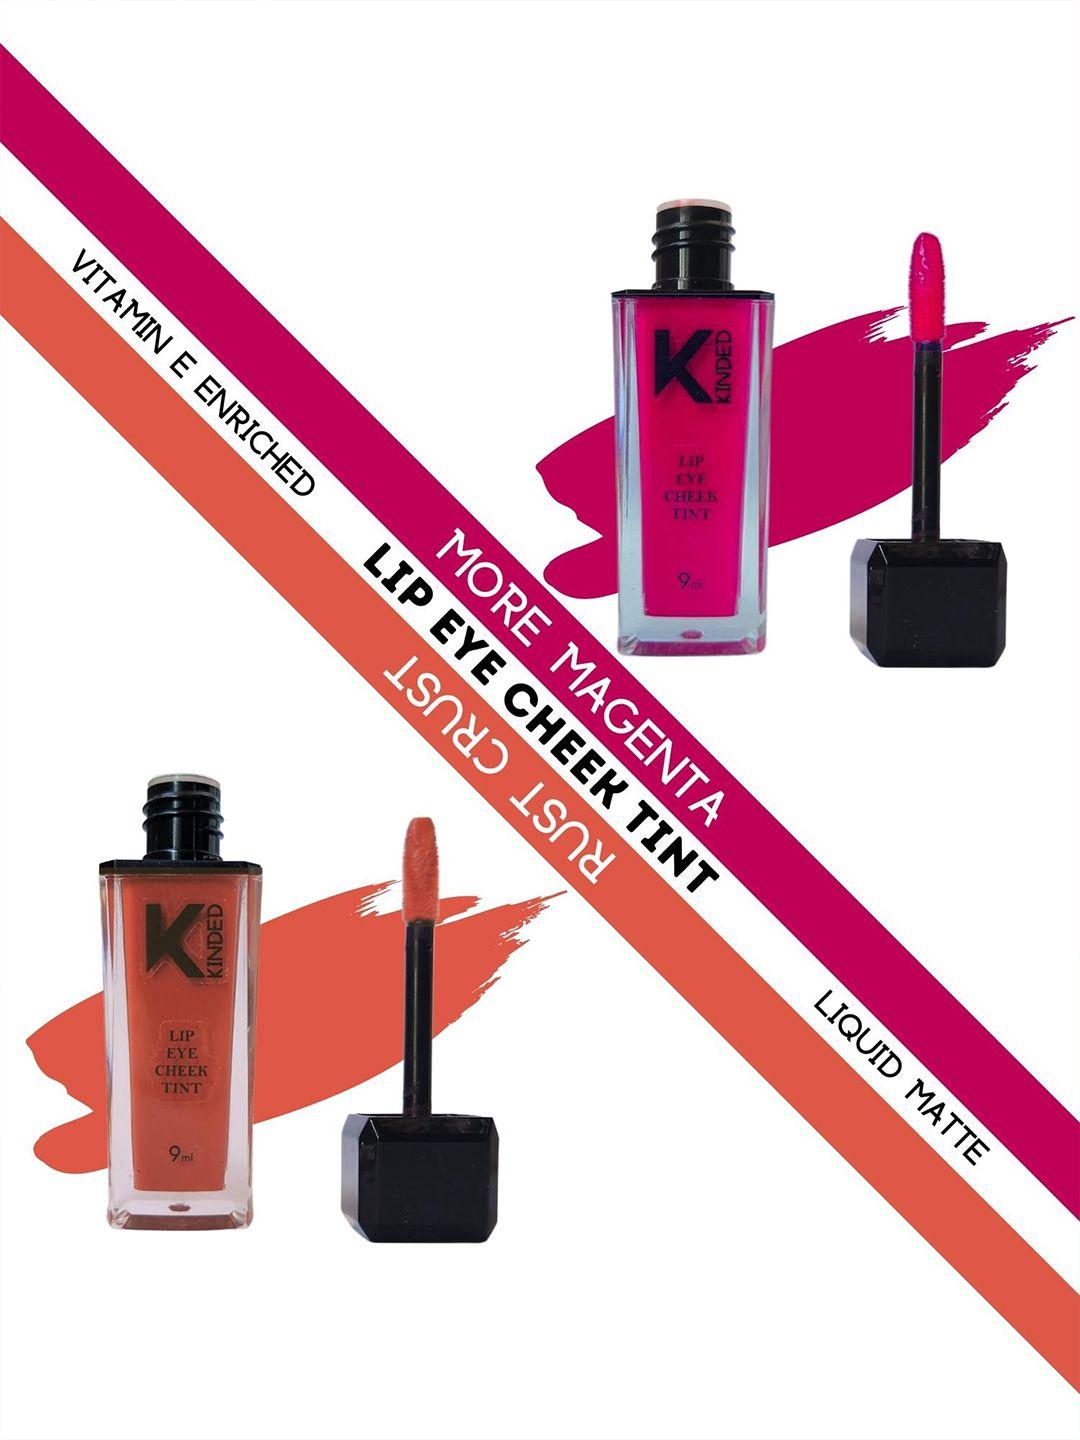 kinded set of 2 lip eye cheek tint with vitamin e - more magenta 02 & rust crust 05